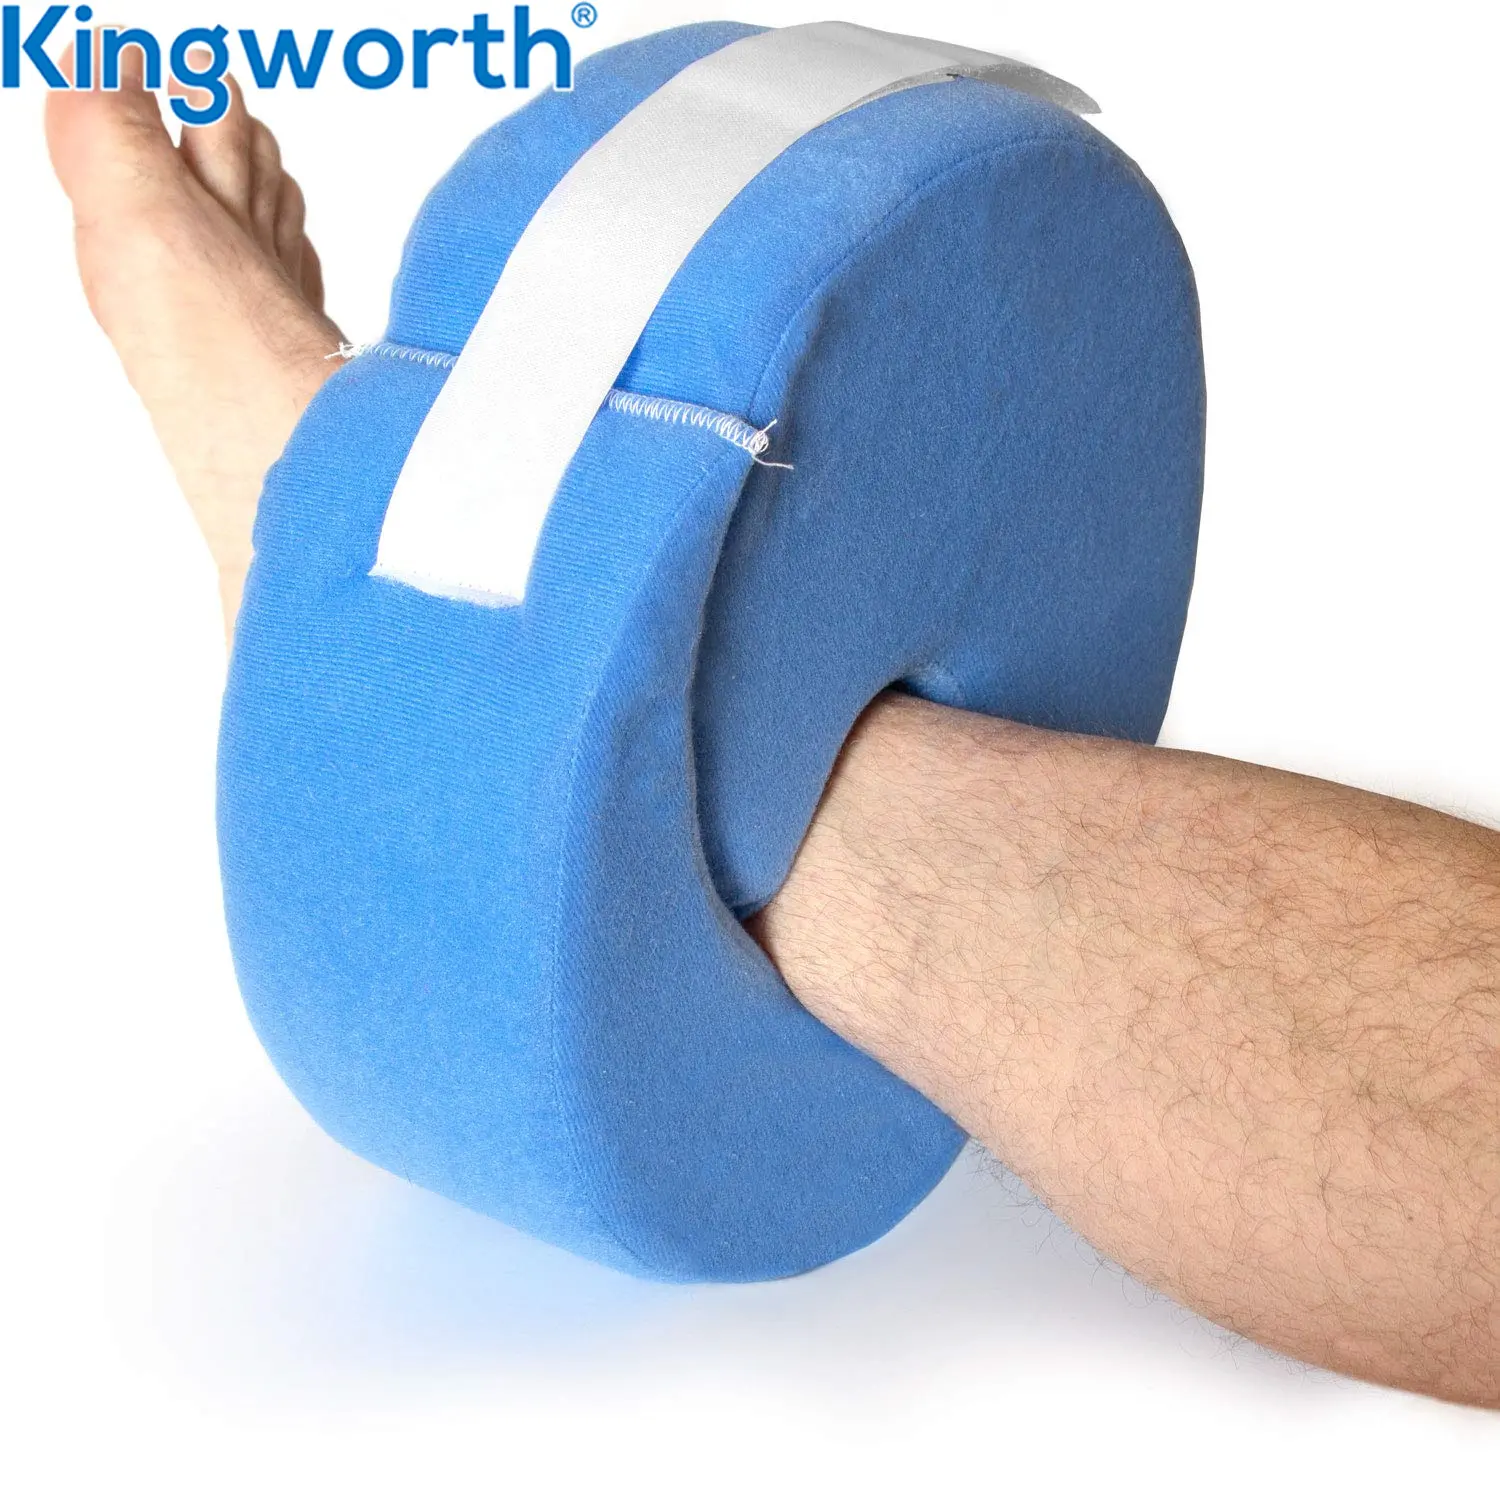 Kingworth Adjustable Hook And Loop Medical Ankle Cushion Leg And Foot Elevation Pillow